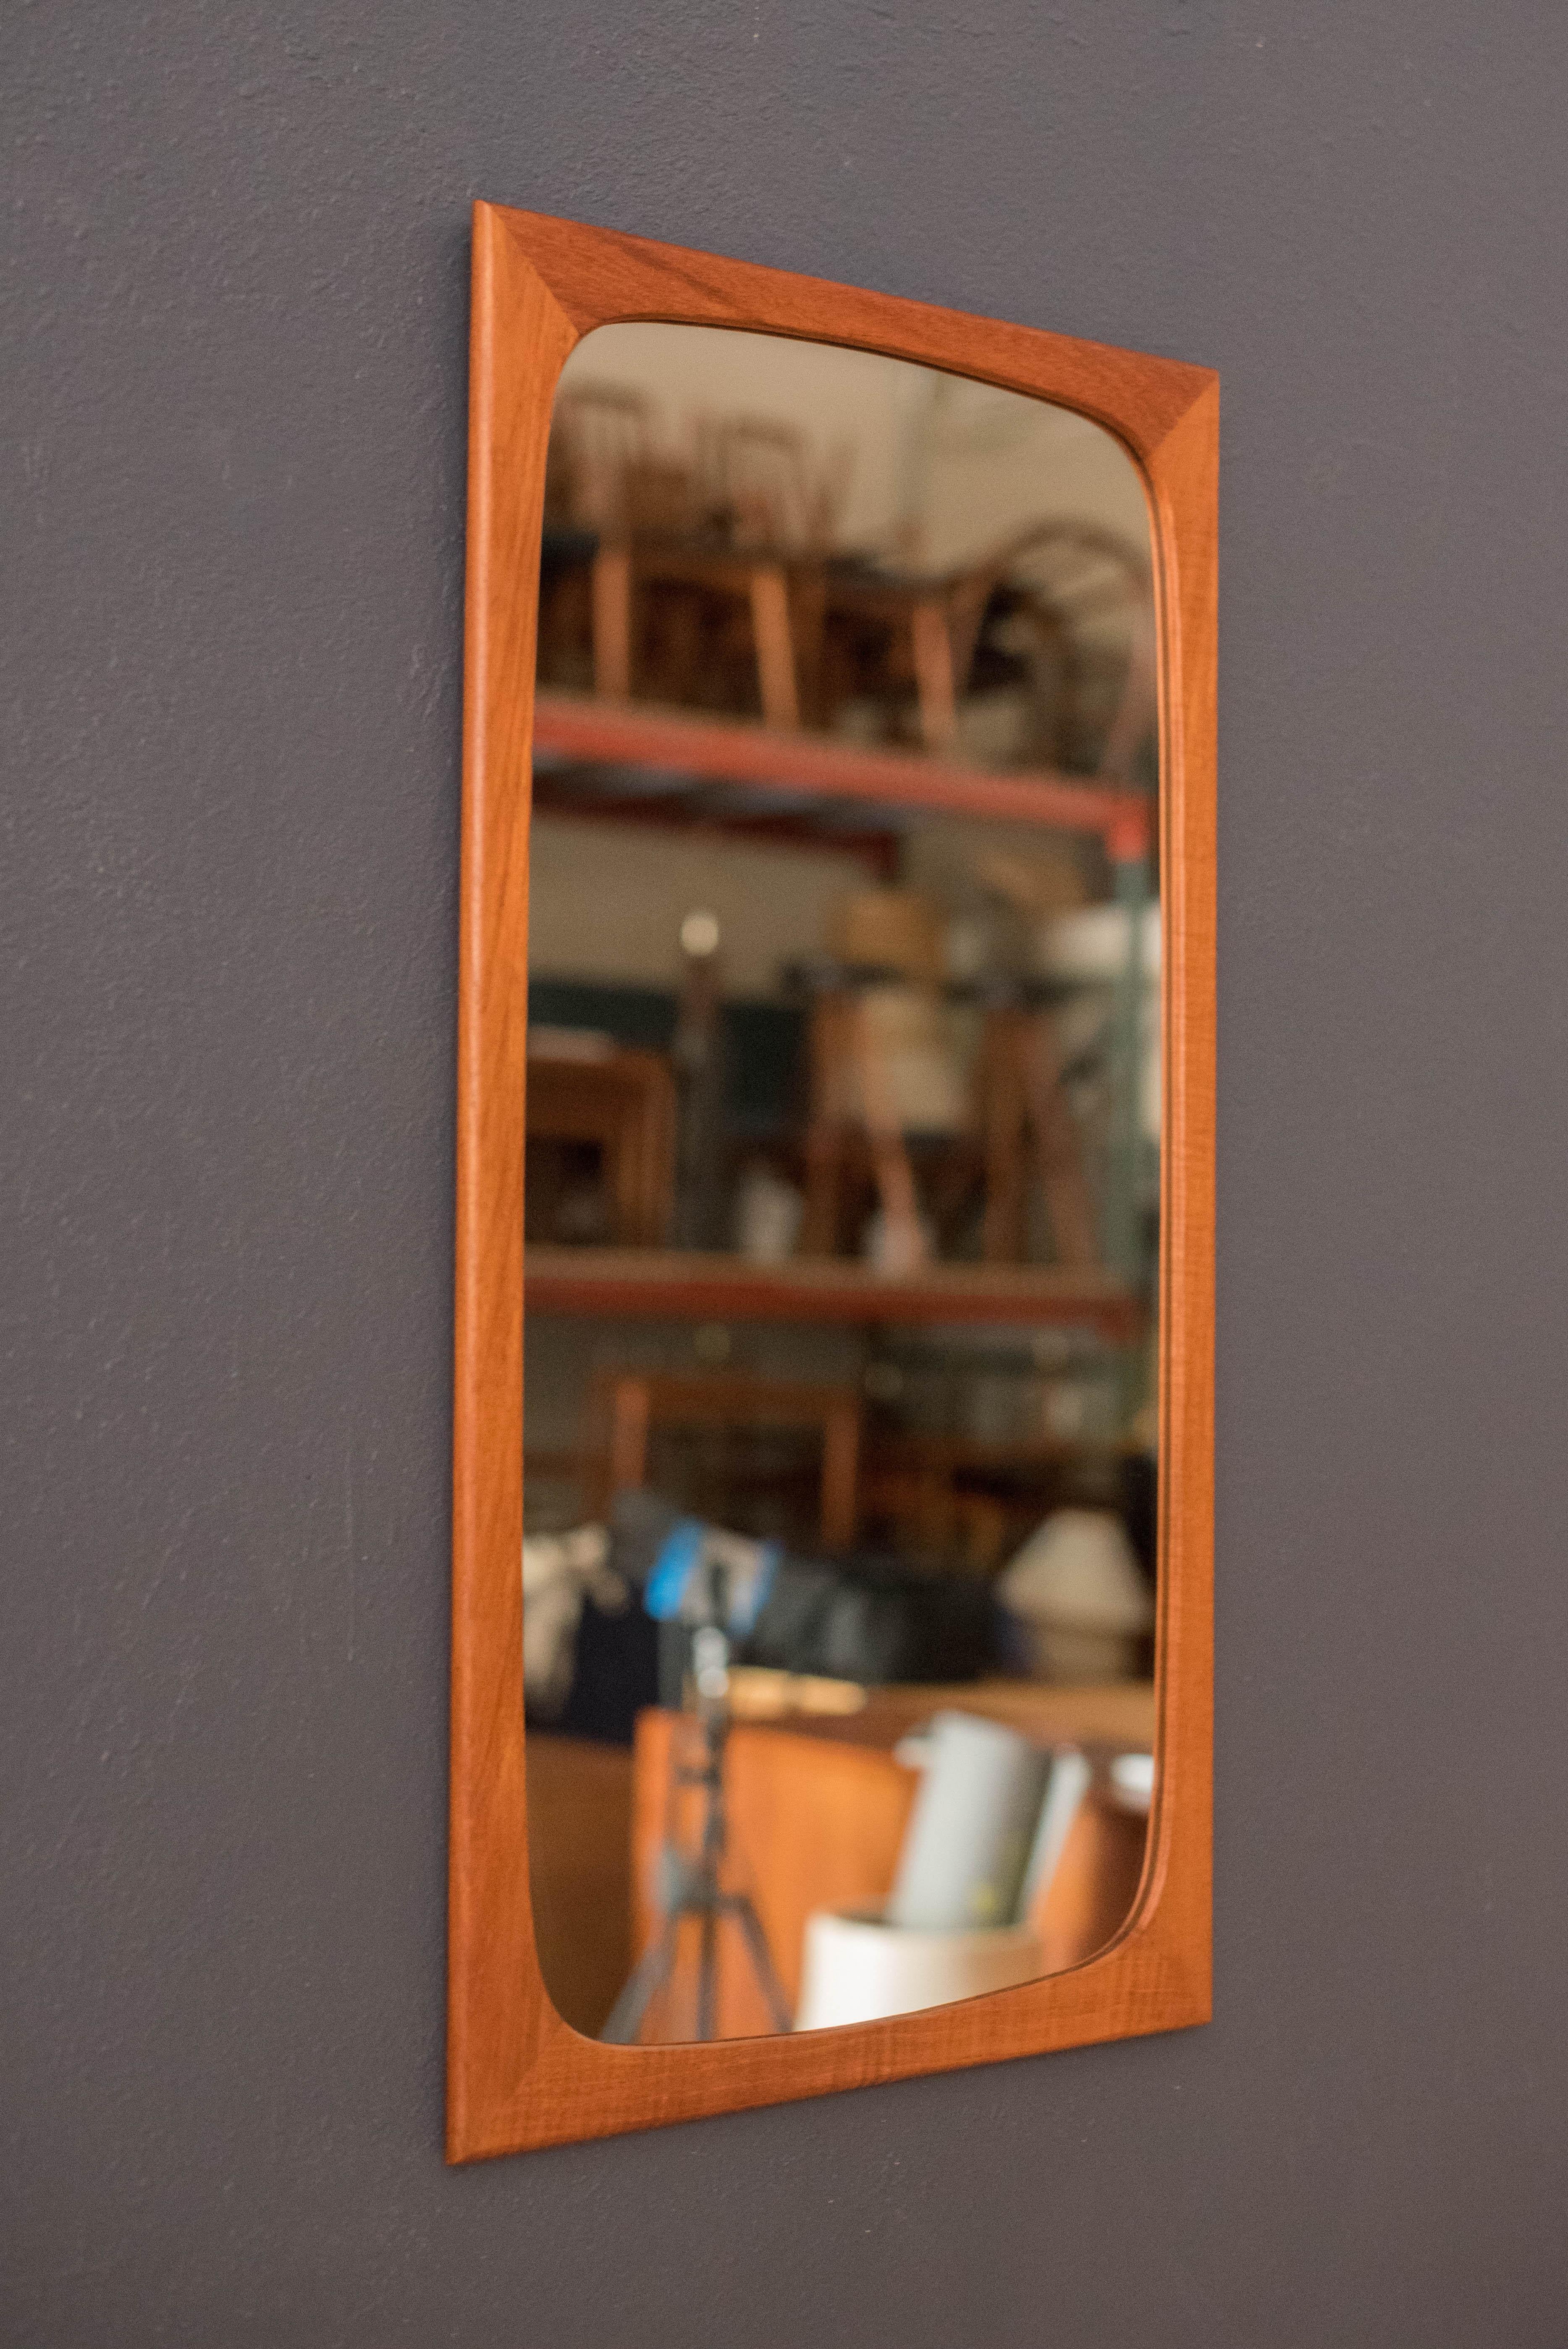 Mid-Century Modern wall mirror by Aarhus Glasimport og Glassliberi, Denmark. This decorative mirror has a contoured rectangular teak frame that fits perfectly in an entryway space or as an accent vanity piece.